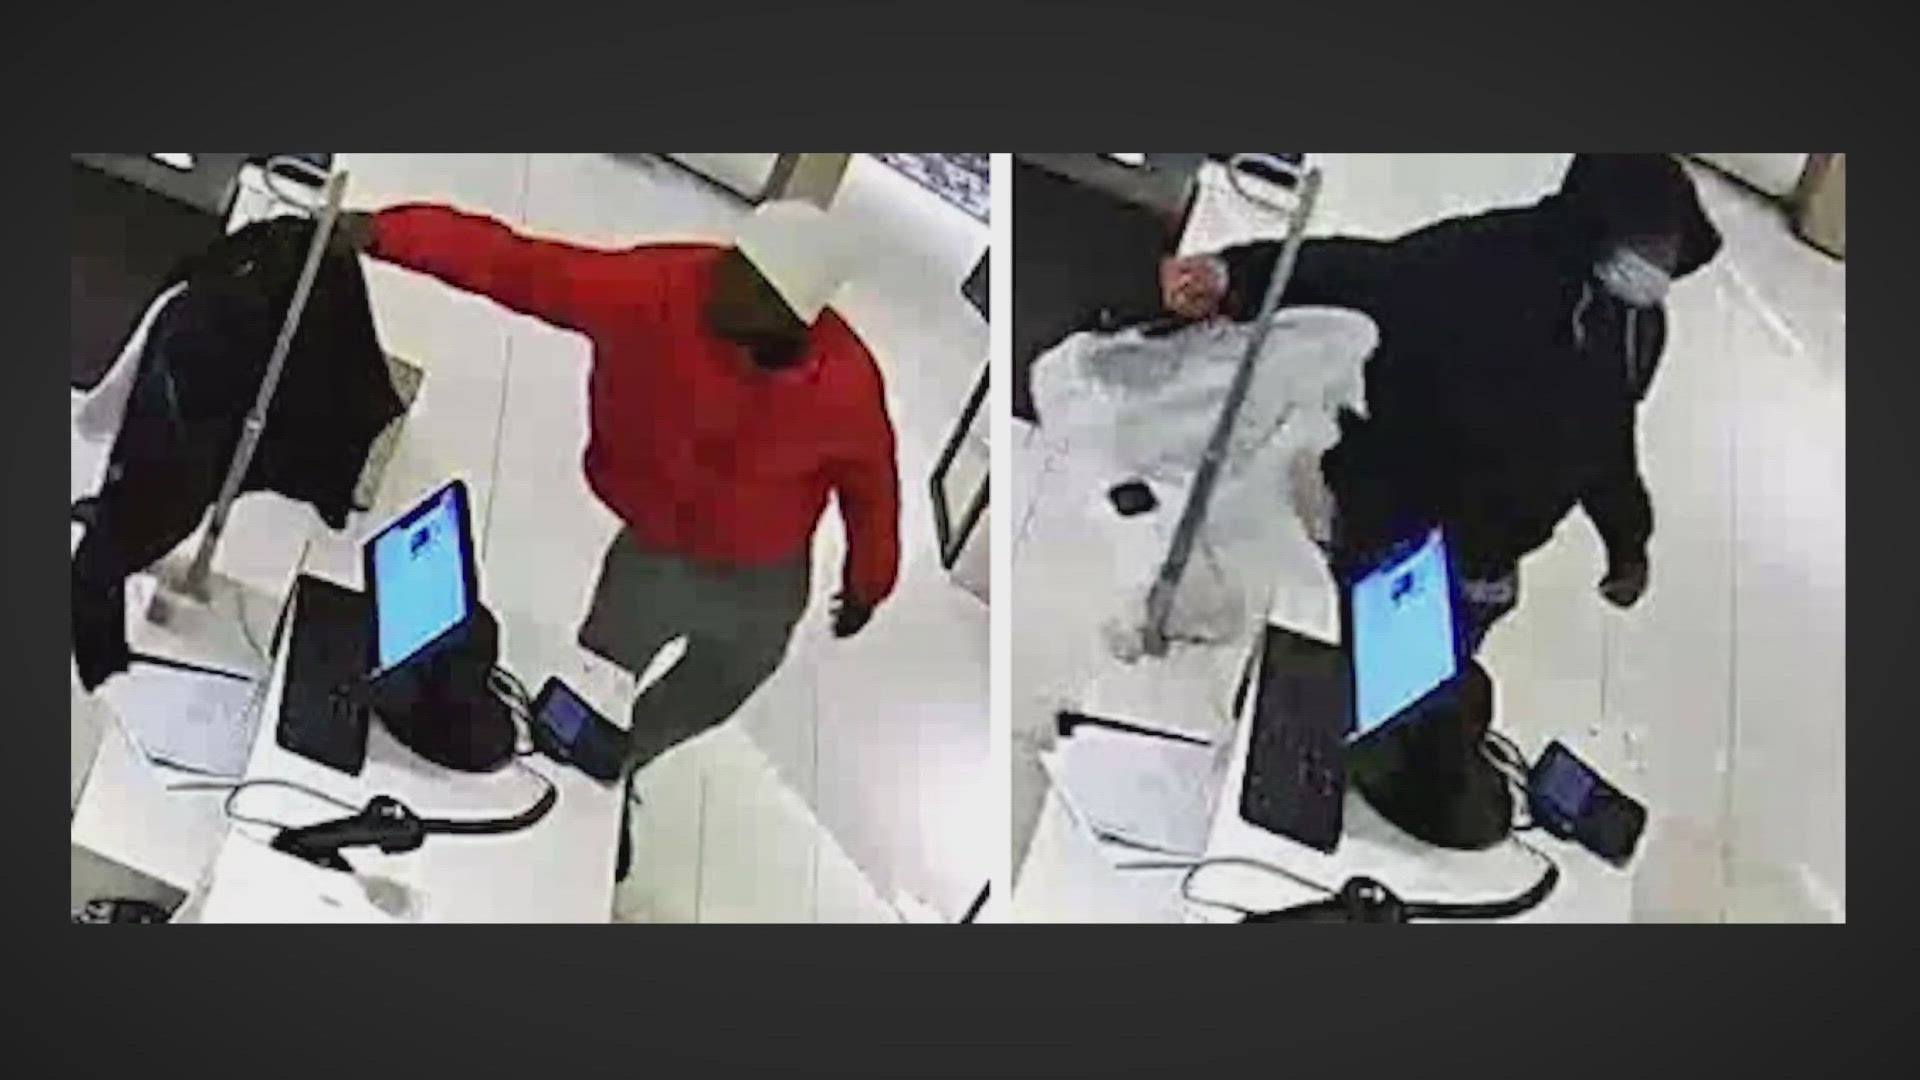 The group of suspects is accused of stealing as much as $17,000 of merchandise.